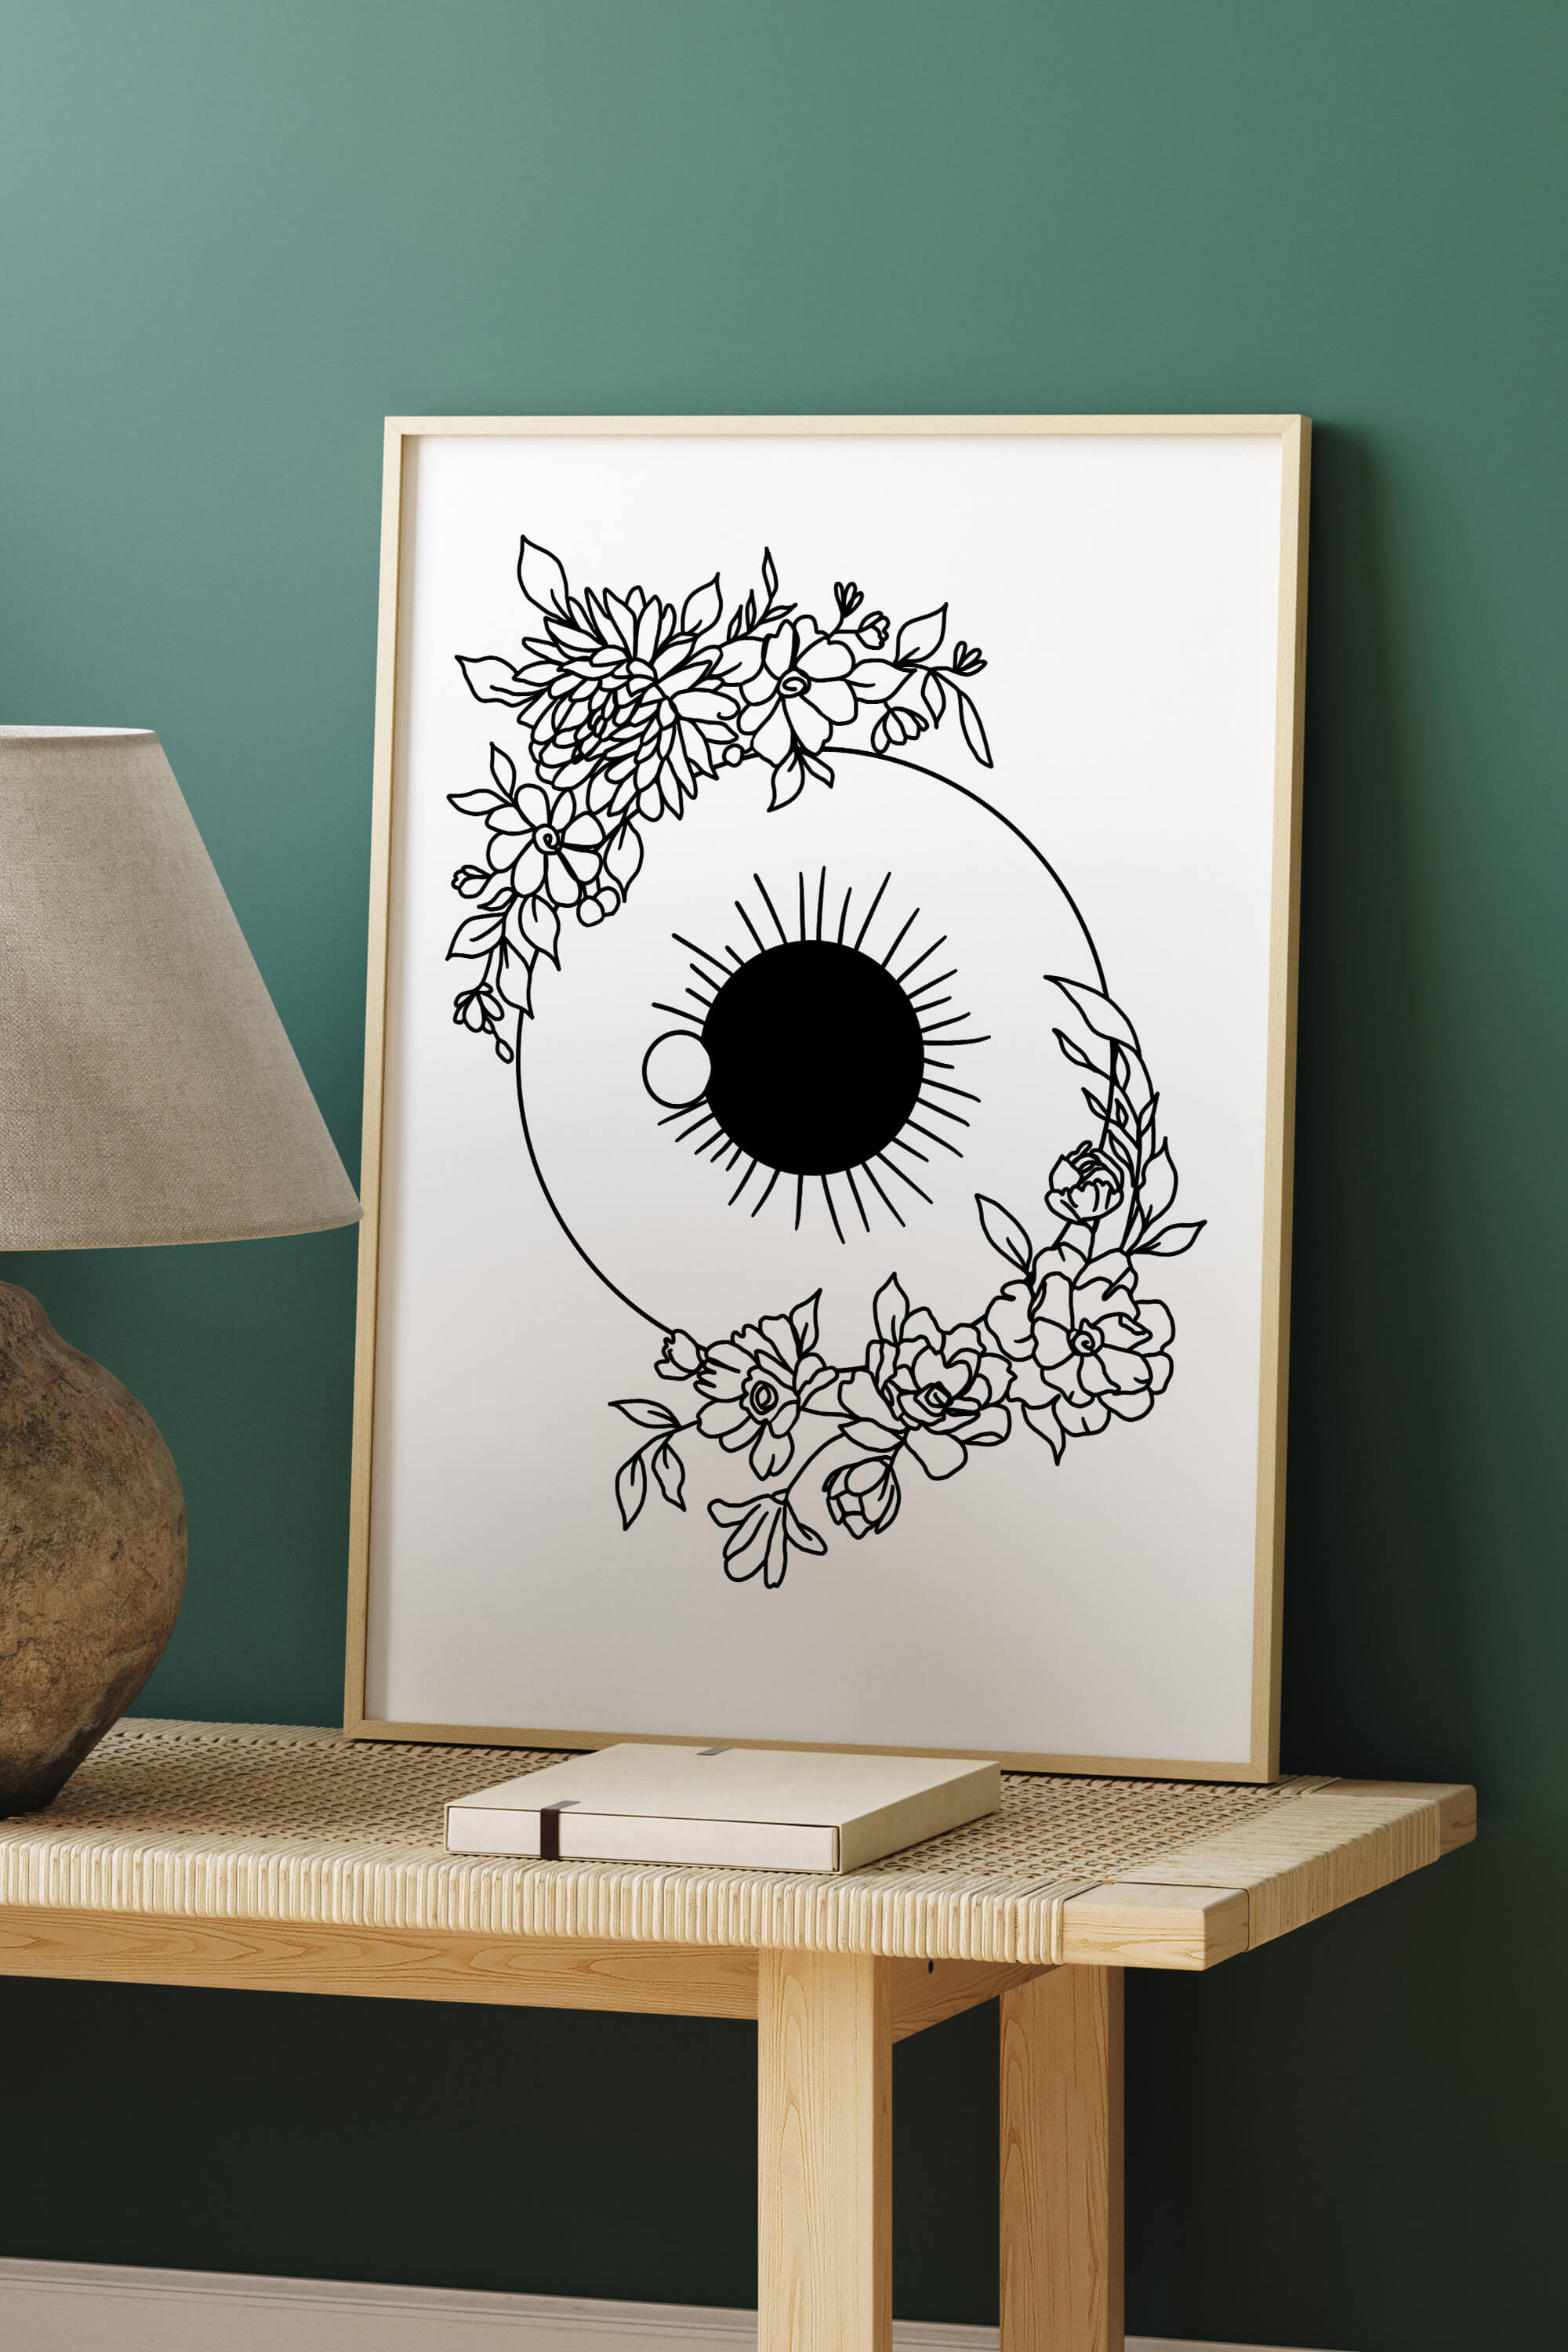 Elevate your space with this eye-catching monochrome art featuring intricate anatomical details, perfect for a sophisticated setting.